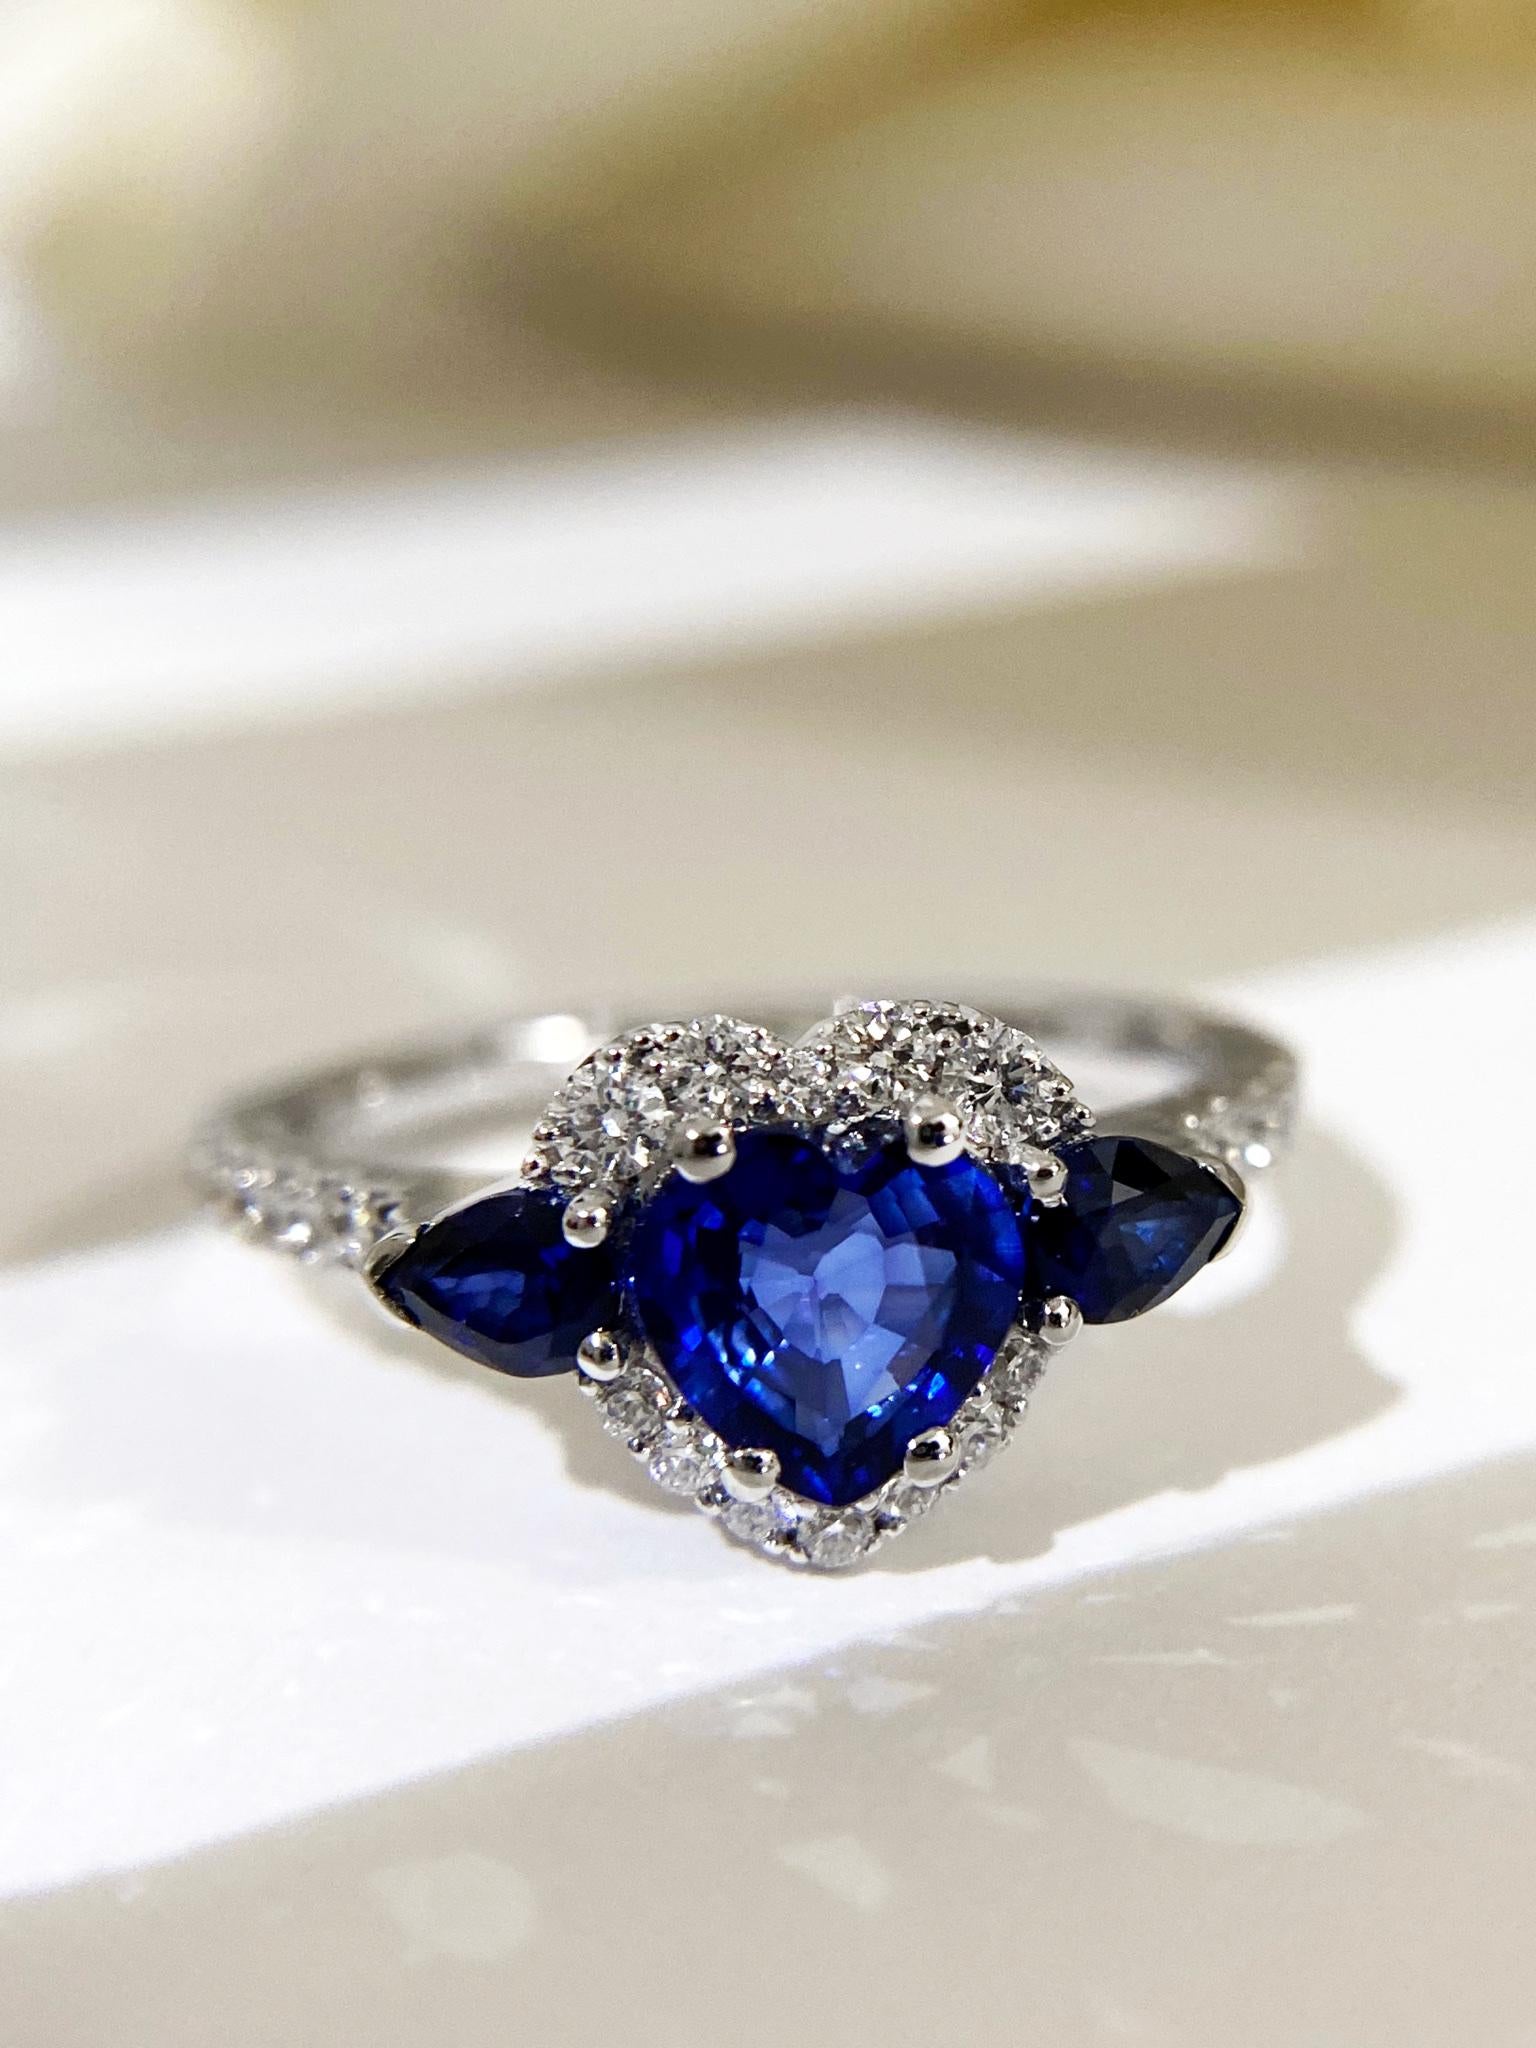 For Sale:  Heart Ring with Blue Sapphires and Diamonds, 18 Karat White Gold, Made in Italy 3